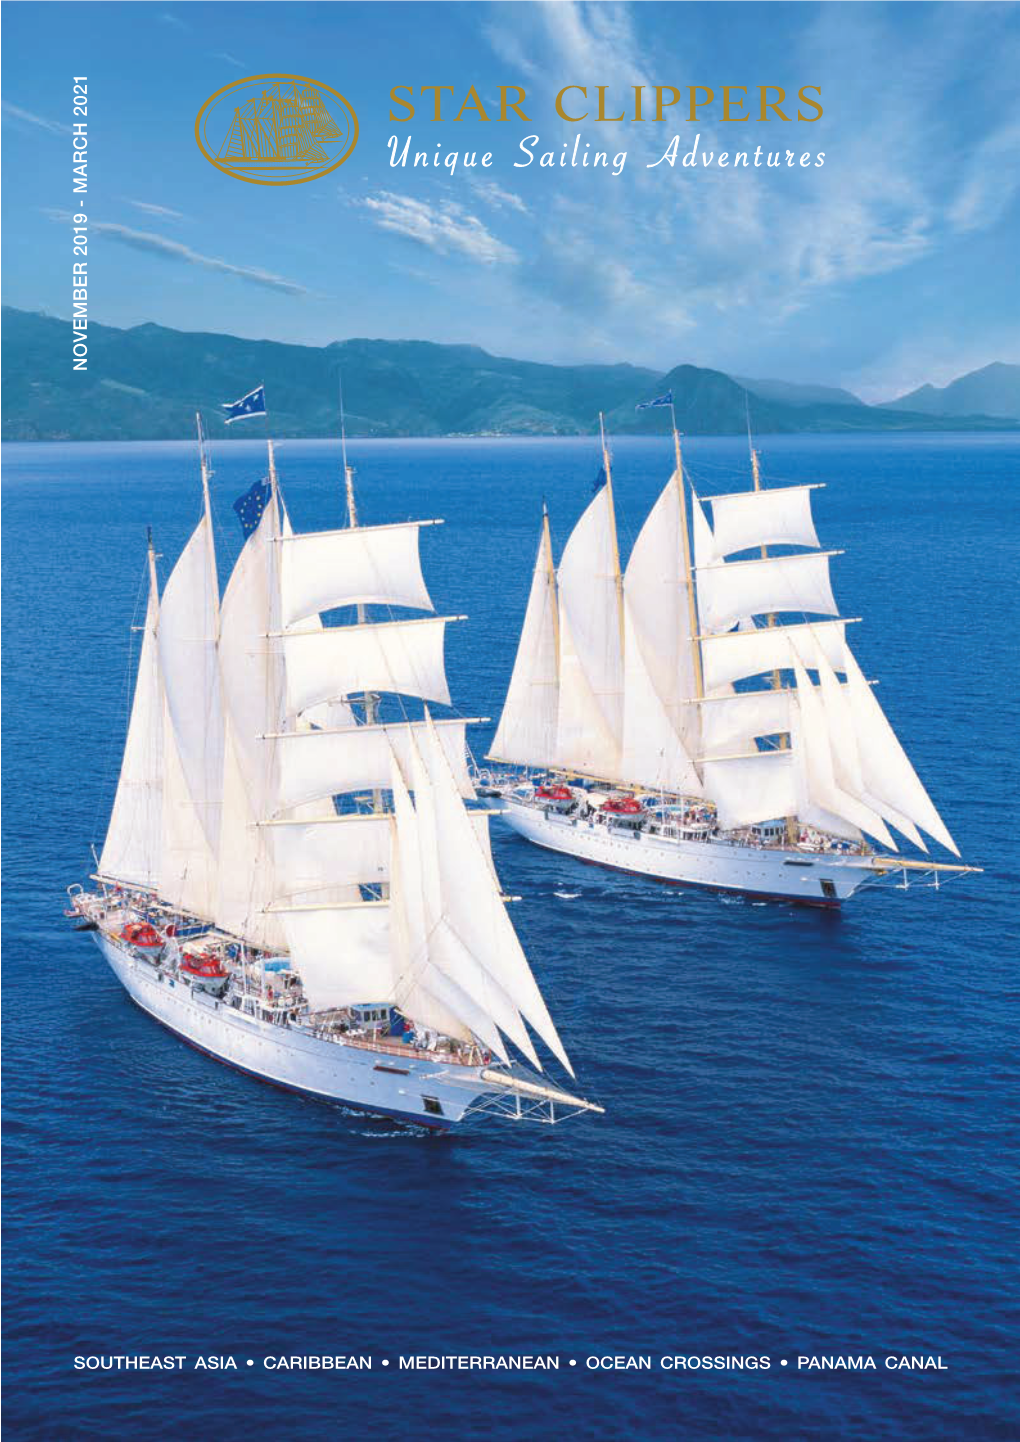 STAR CLIPPERS Unique Sailing Adventures NOVEMBER 2019 - MARCH 2021